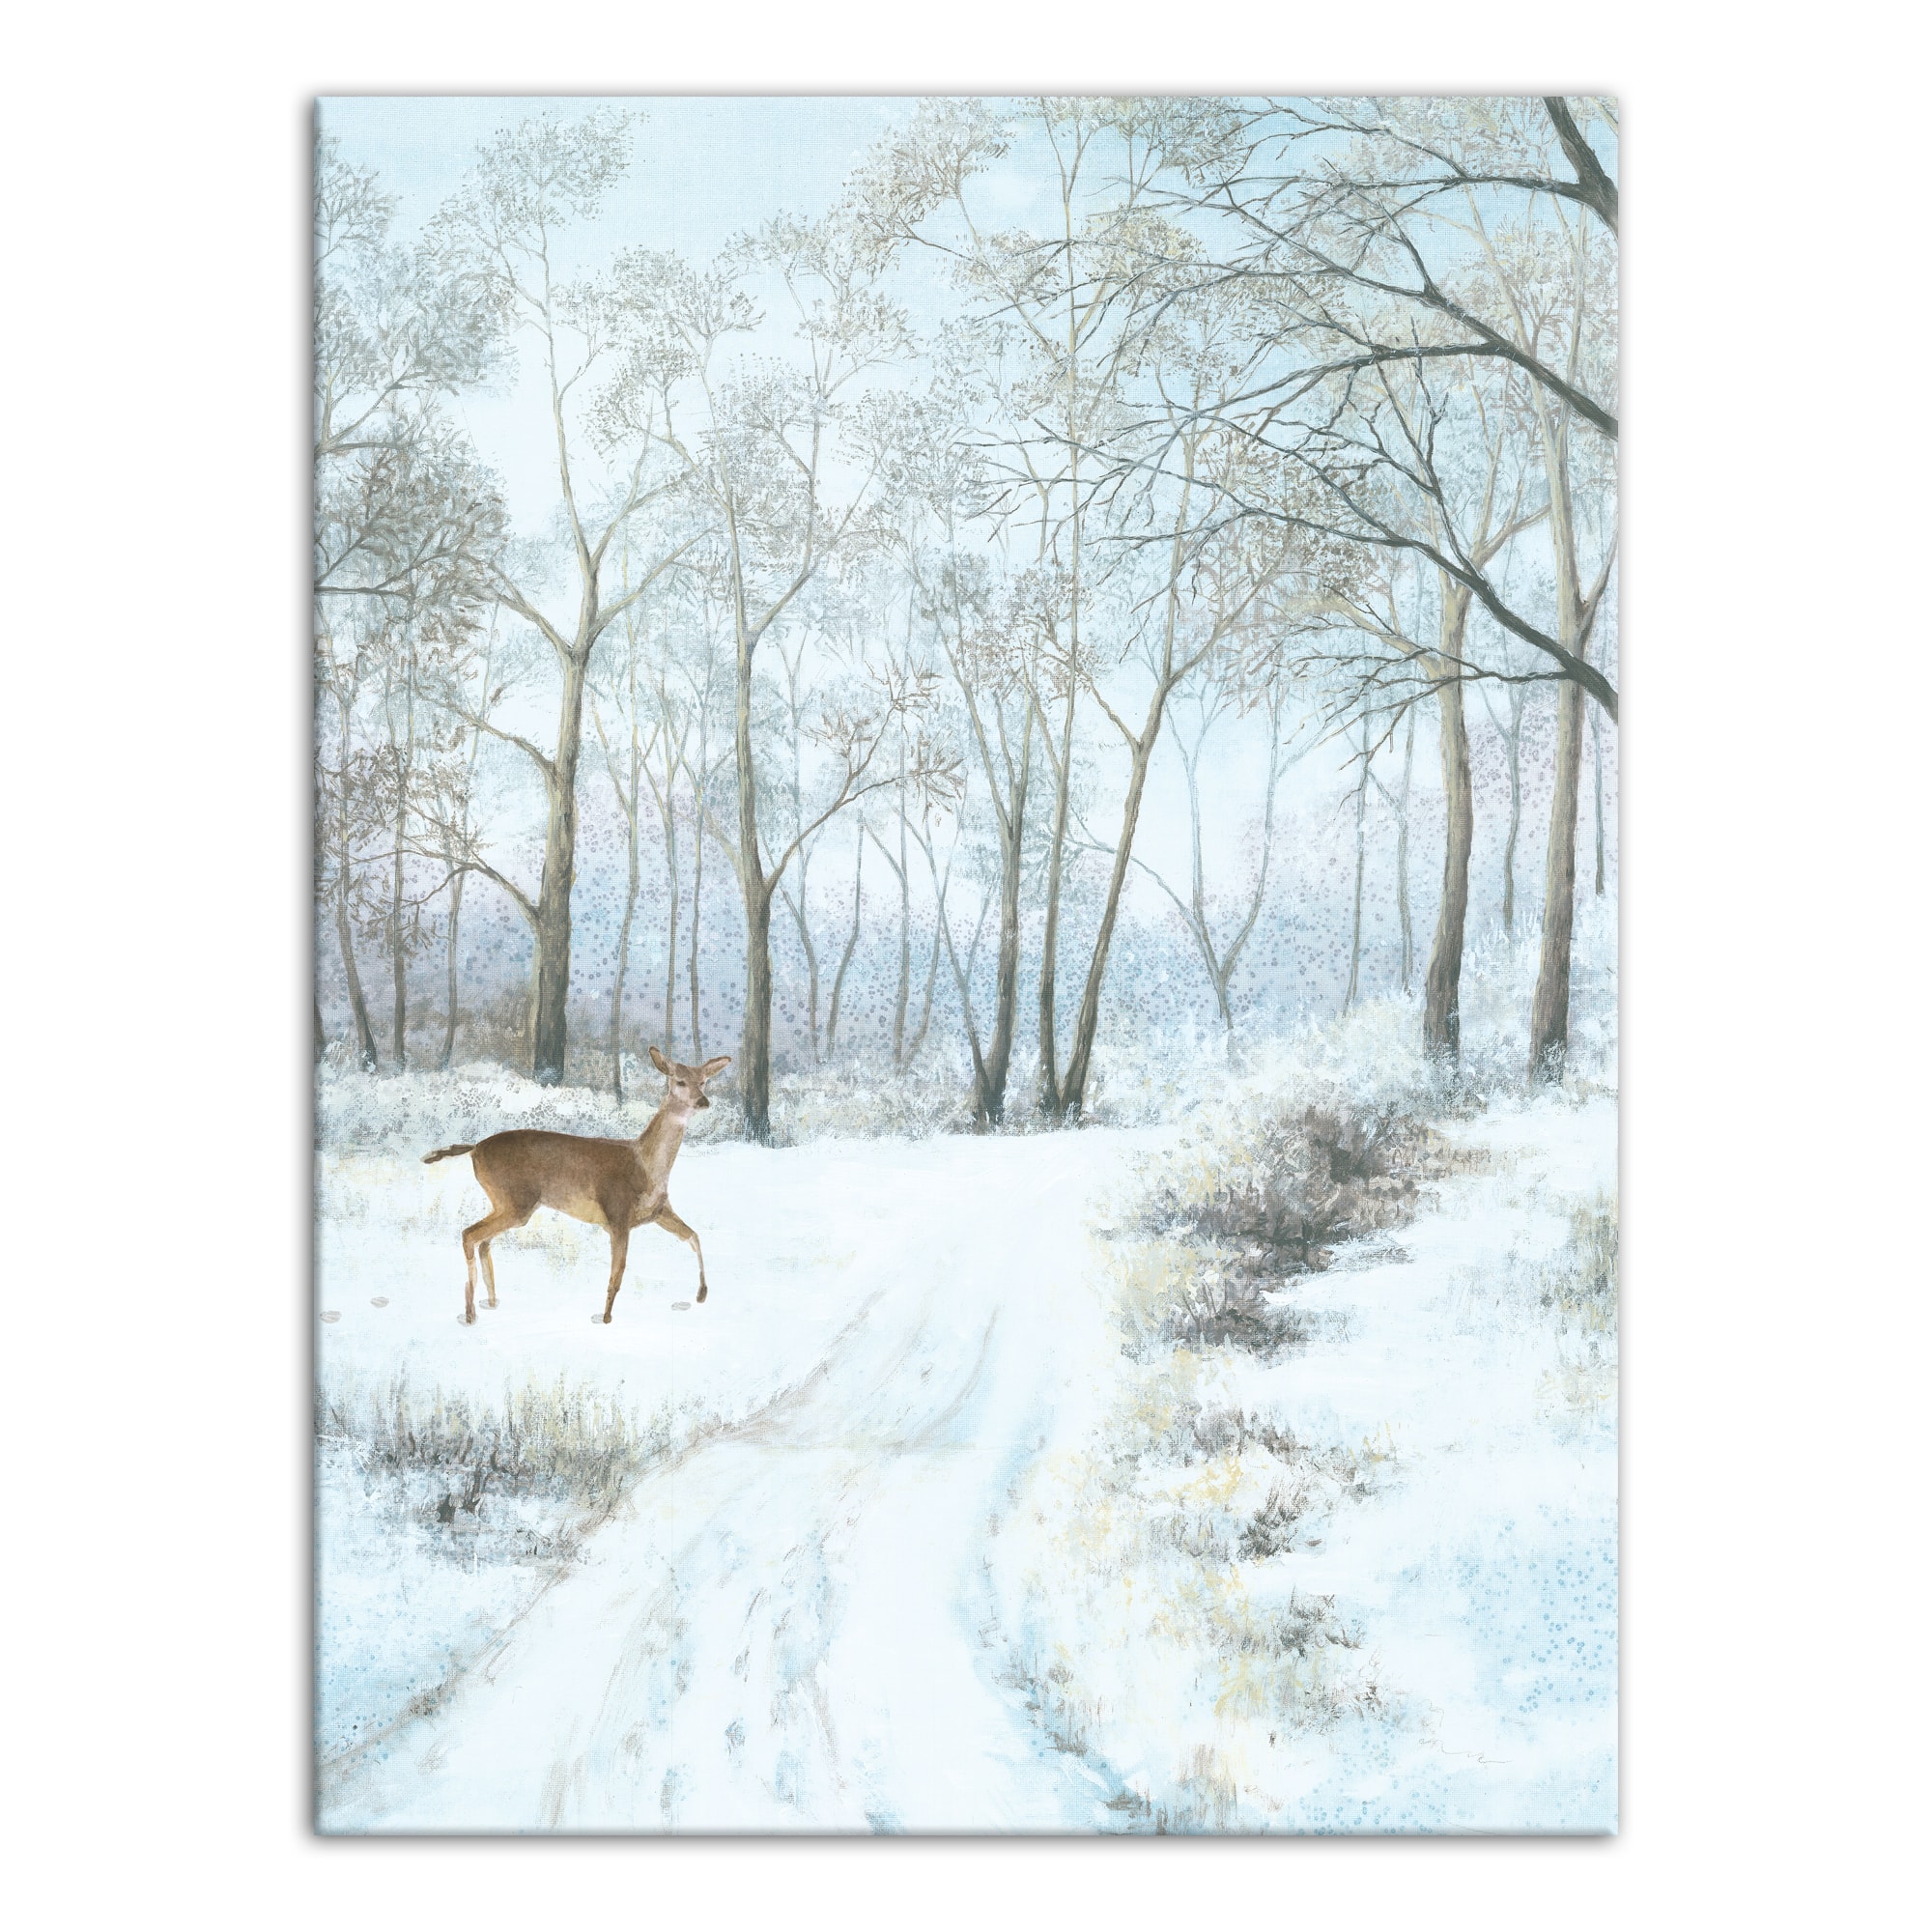 Creative Products Doe Walking in The Snow 30 x 40 Canvas Wall Art, Blue